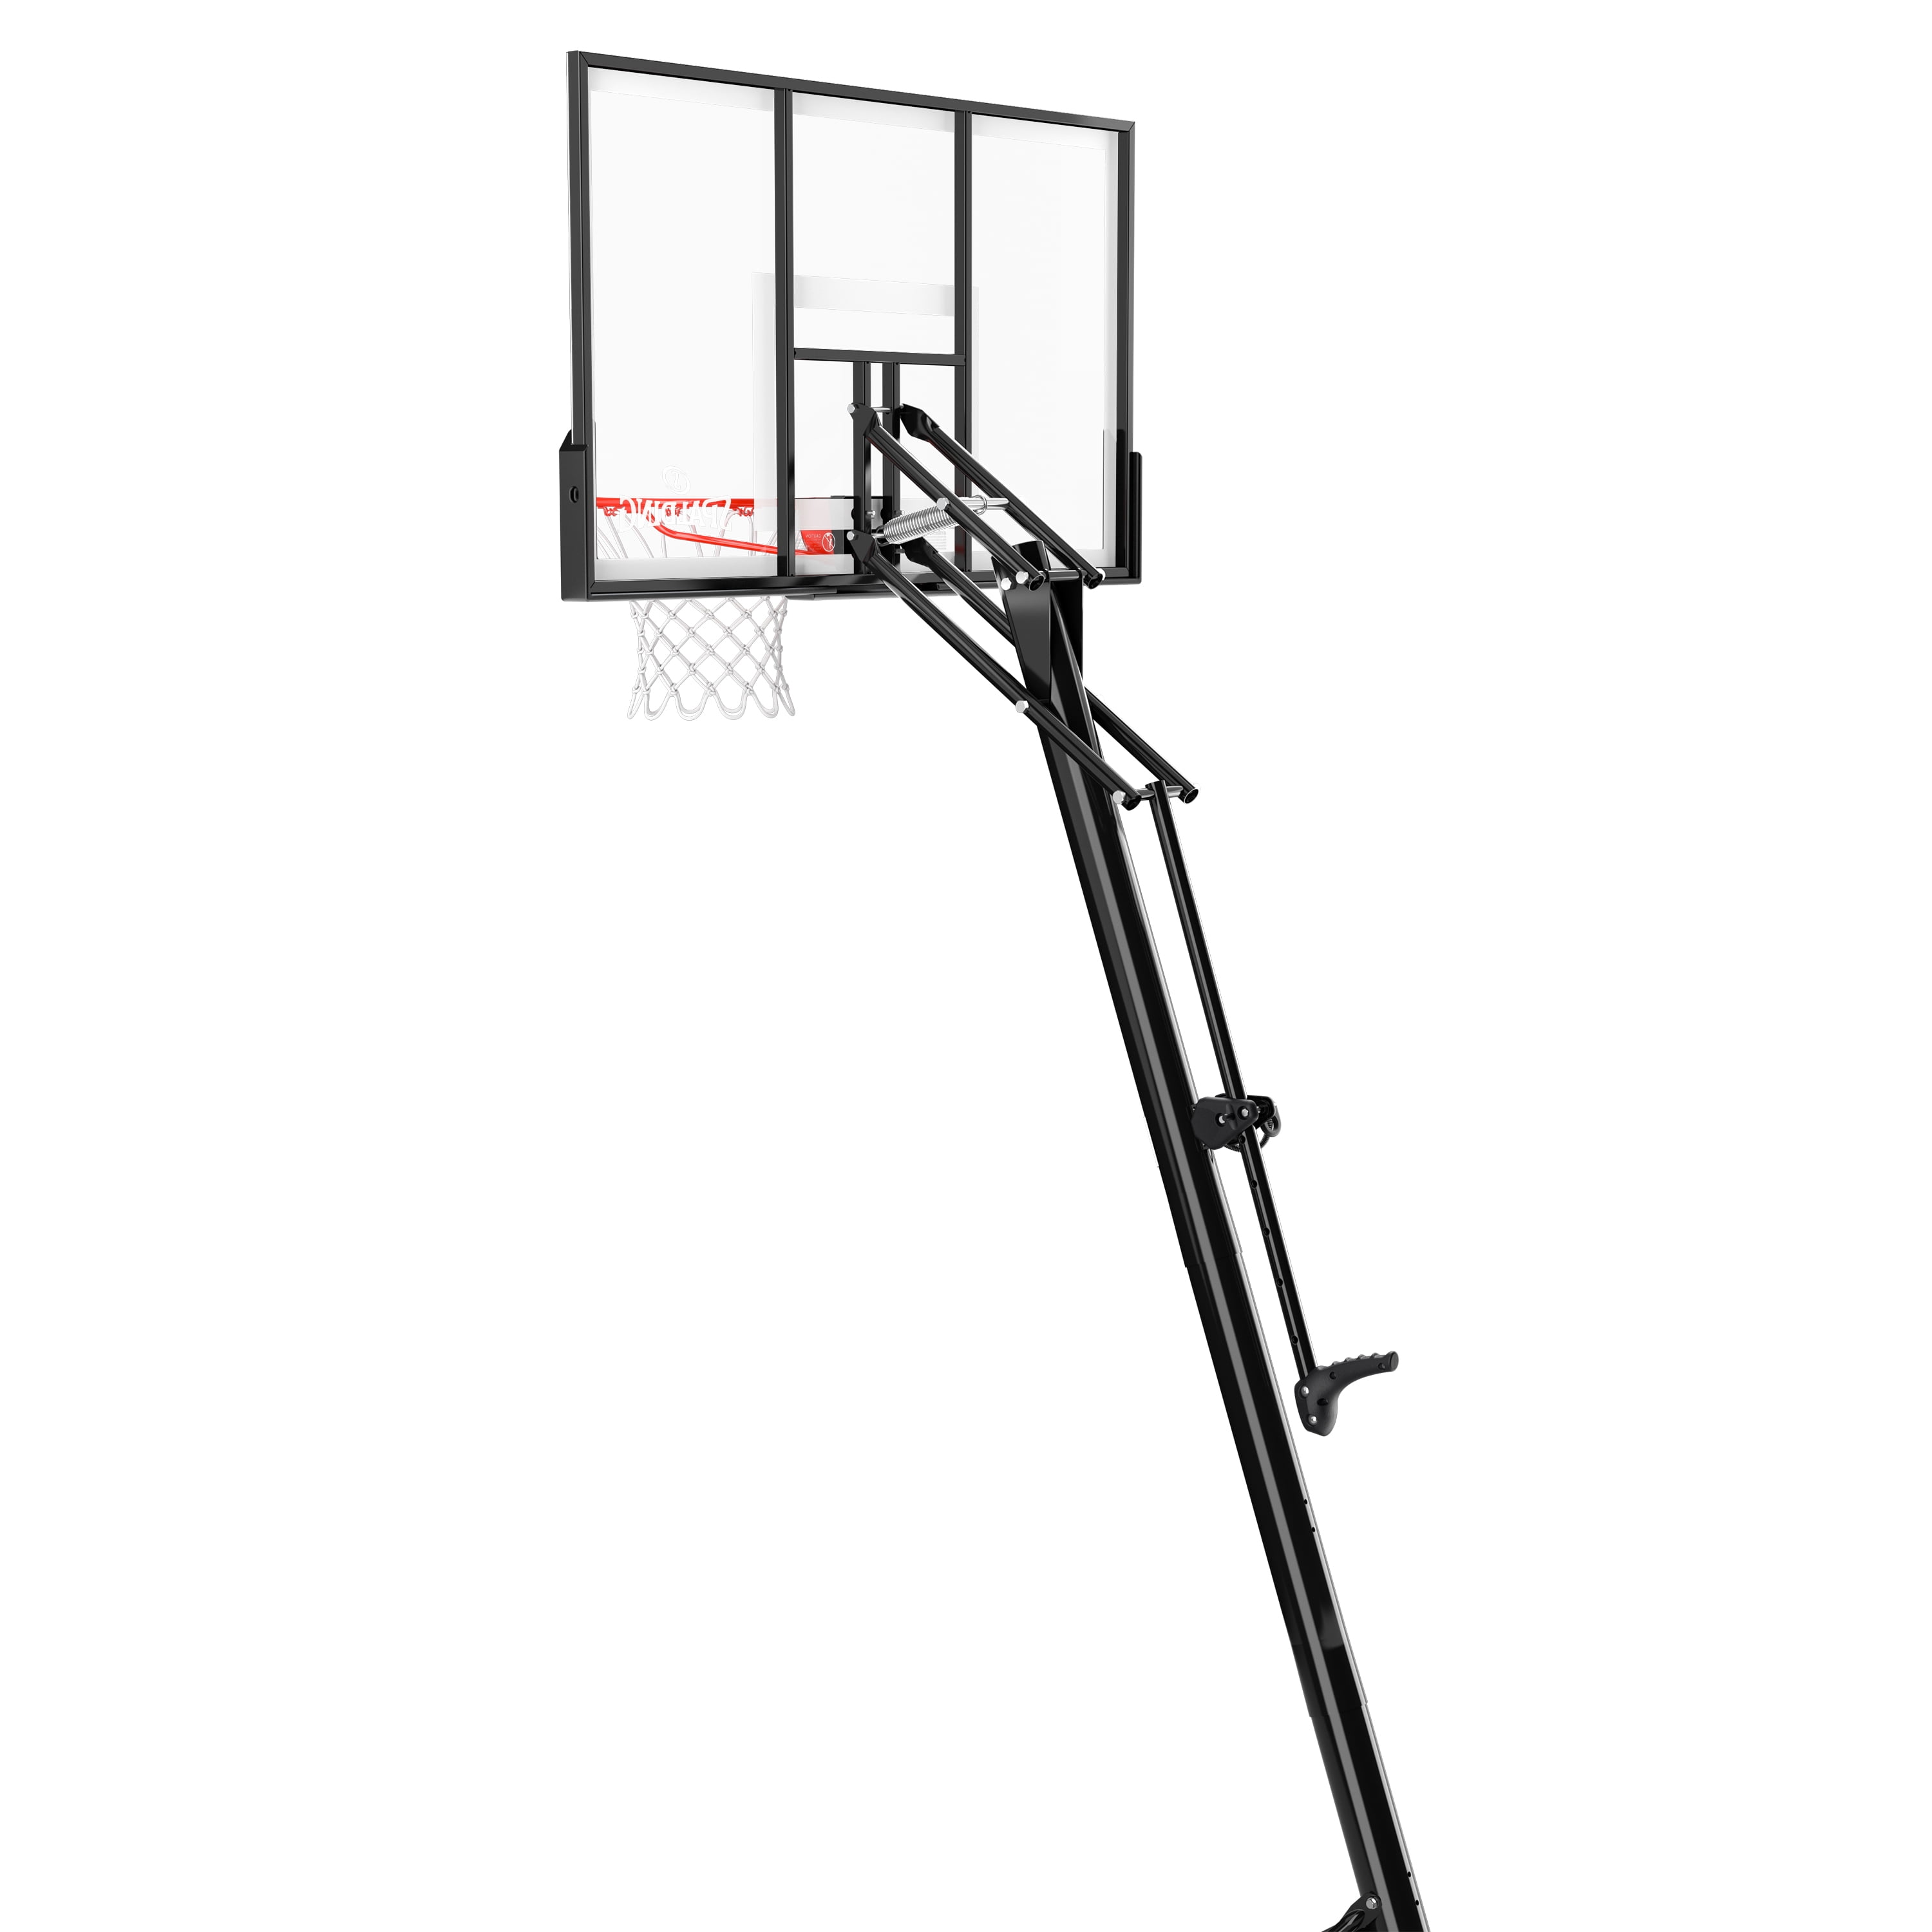 Spalding 66291 Pro Slam Portable Basketball System with 54in Acrylic Backboard for sale online 